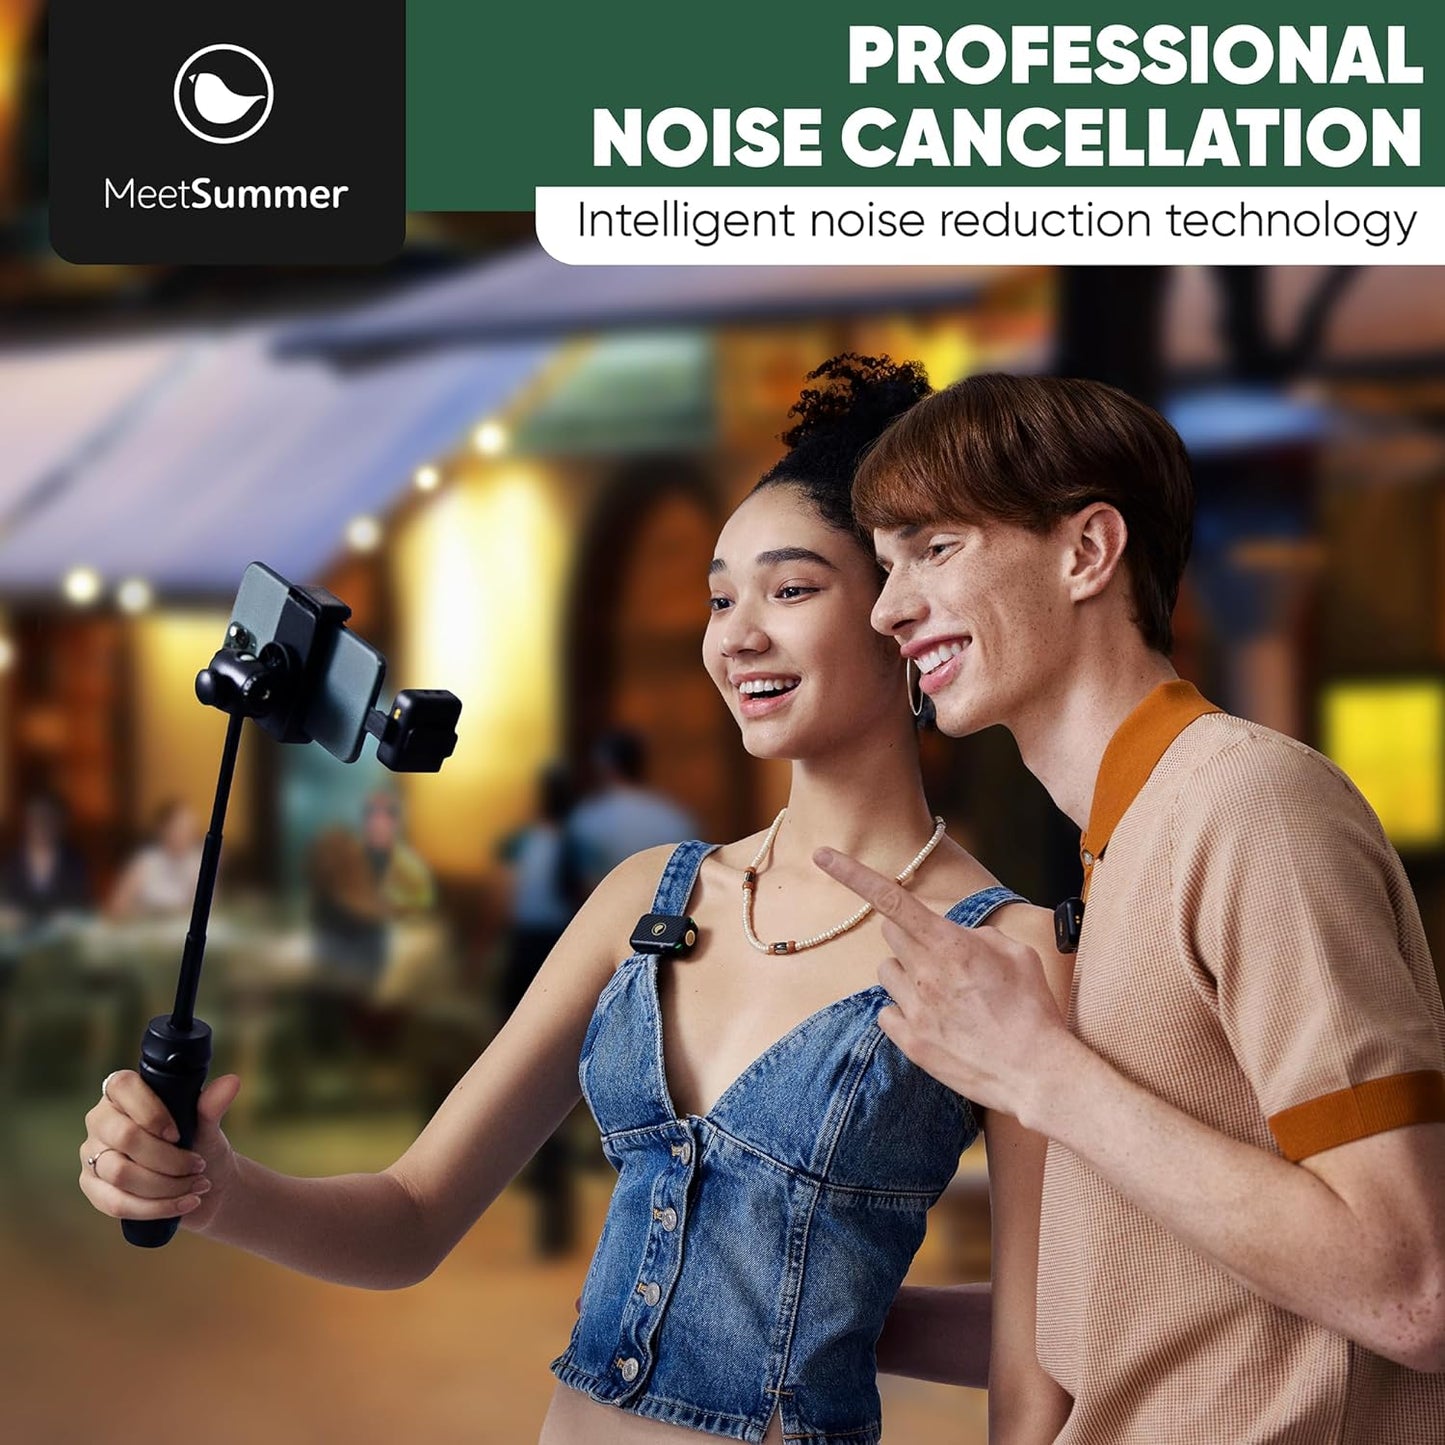 MeetSummer X1 Wireless Lavalier Microphone,Pro Noise Cancellation, Wireless Microphone for PC,Cameras/iPhone/Android/Live Streaming, Record Interview, Easy to Use for Vlogs,Carbon Black